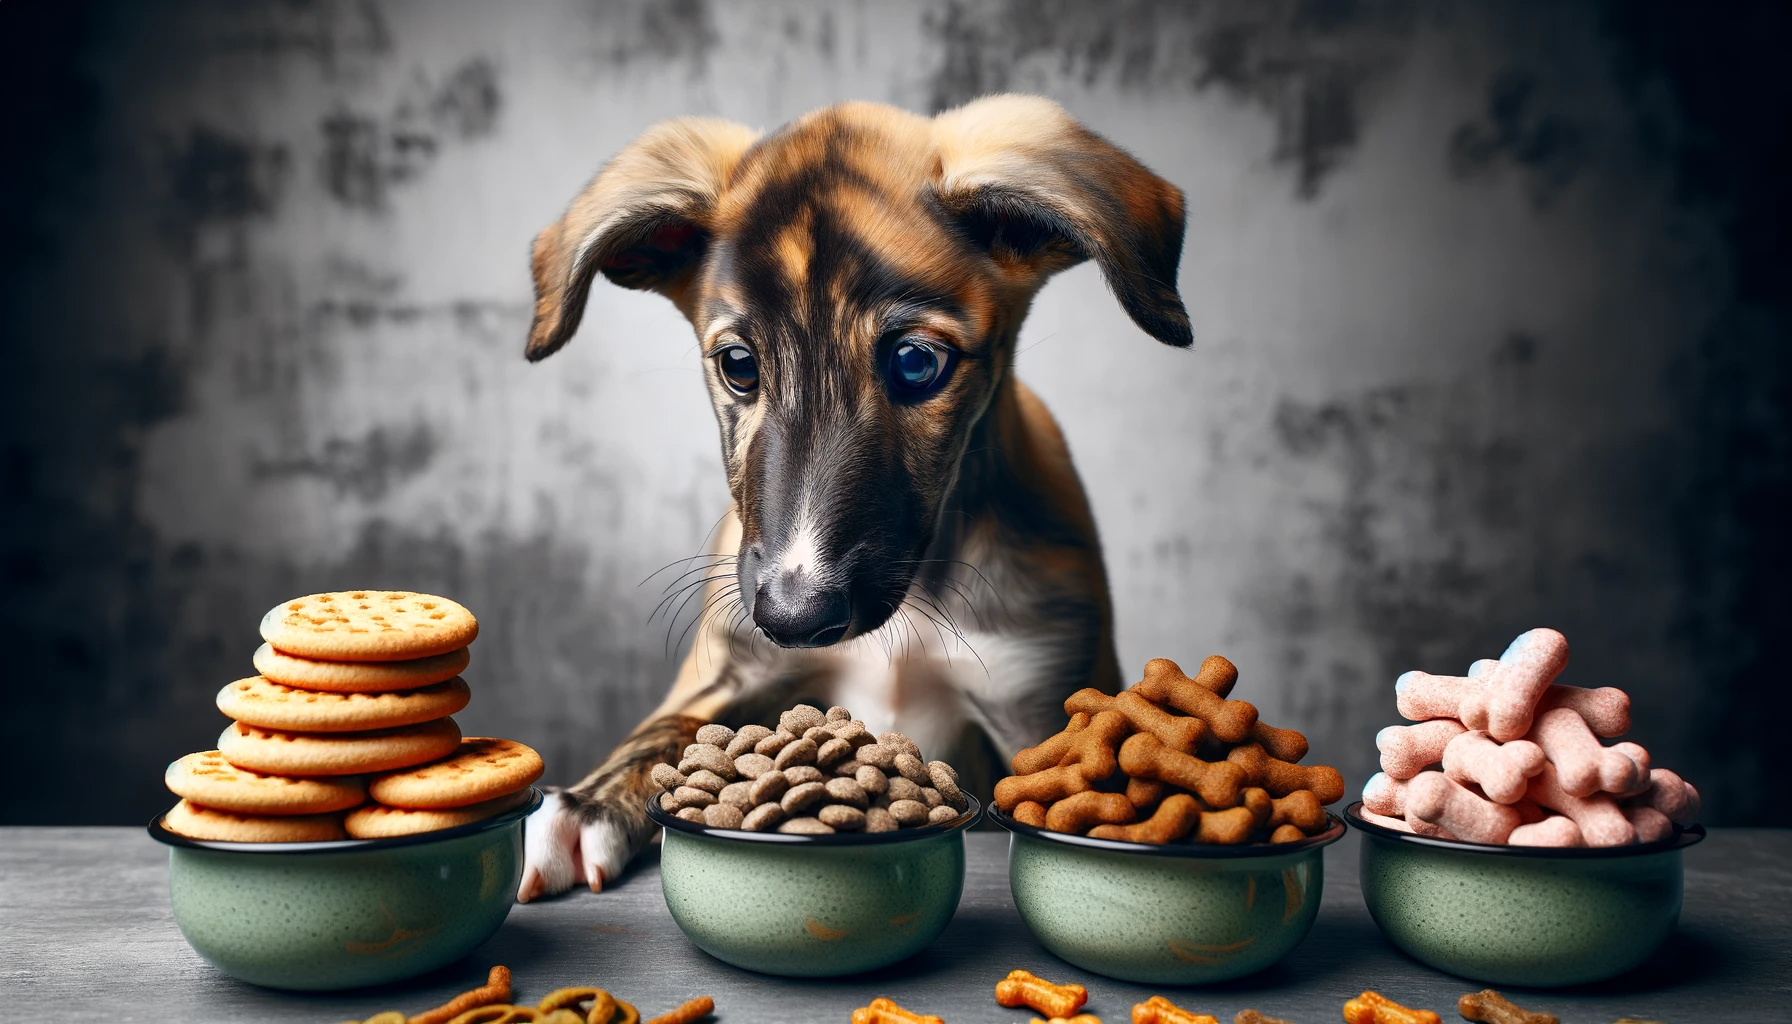 A Lurcher dog, which is similar to a Greyador, choosing between various healthy treats